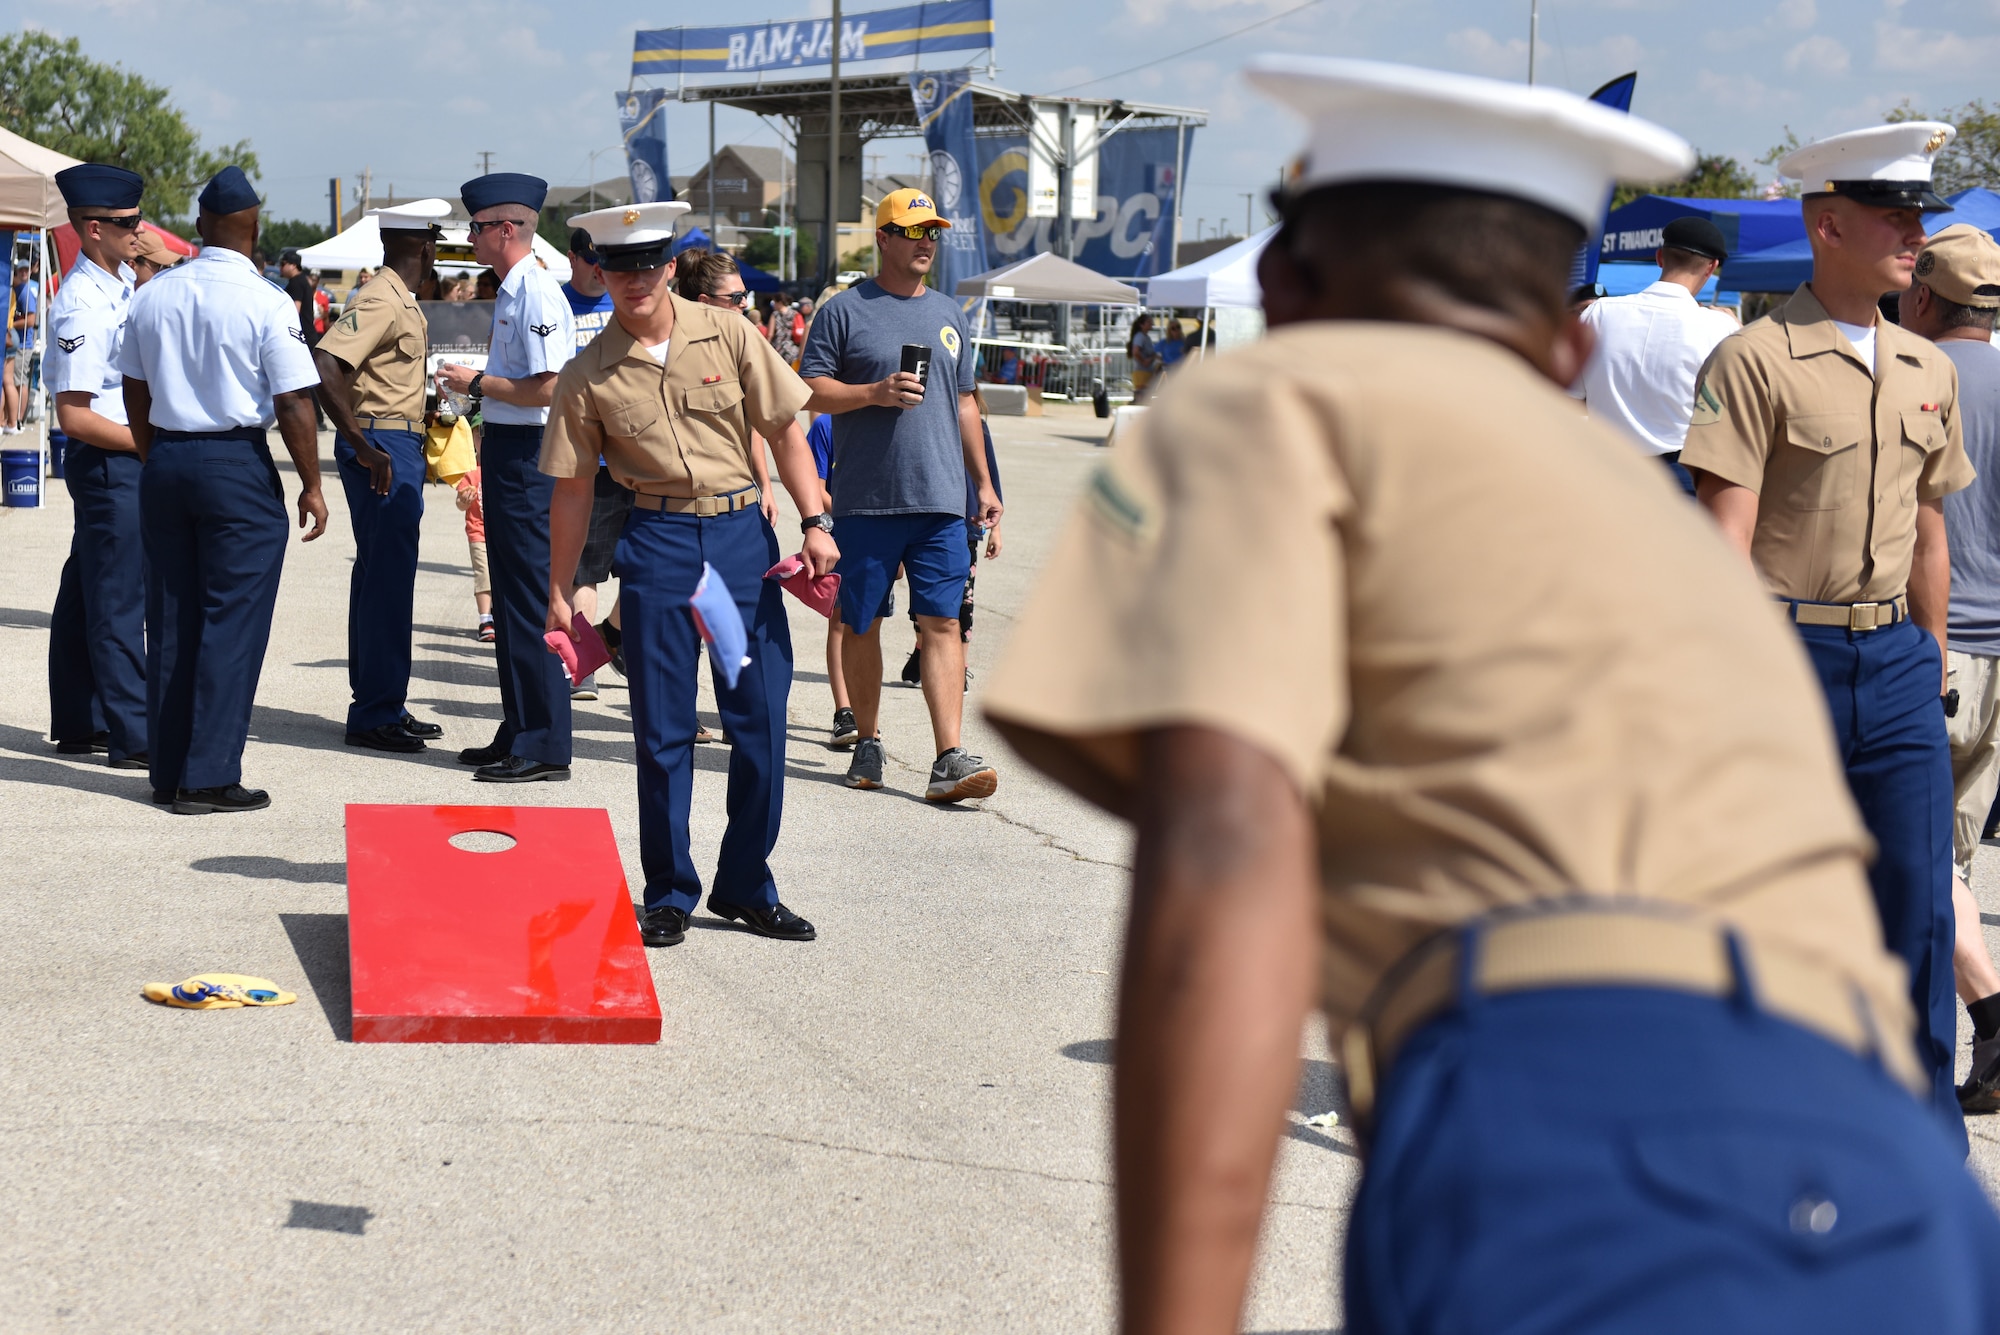 Goodfellow members play a game of corn hole during the 2019 Ram Jam at the LeGrand Alumni Visitors Center before the Angelo State Military Appreciation night in San Angelo, Texas, Sept. 14, 2019. The Ram Jam is a tail gating event where individuals can enjoy games, food and live music. (U.S. Air Force photo by Senior Airman Seraiah Wolf/Released)